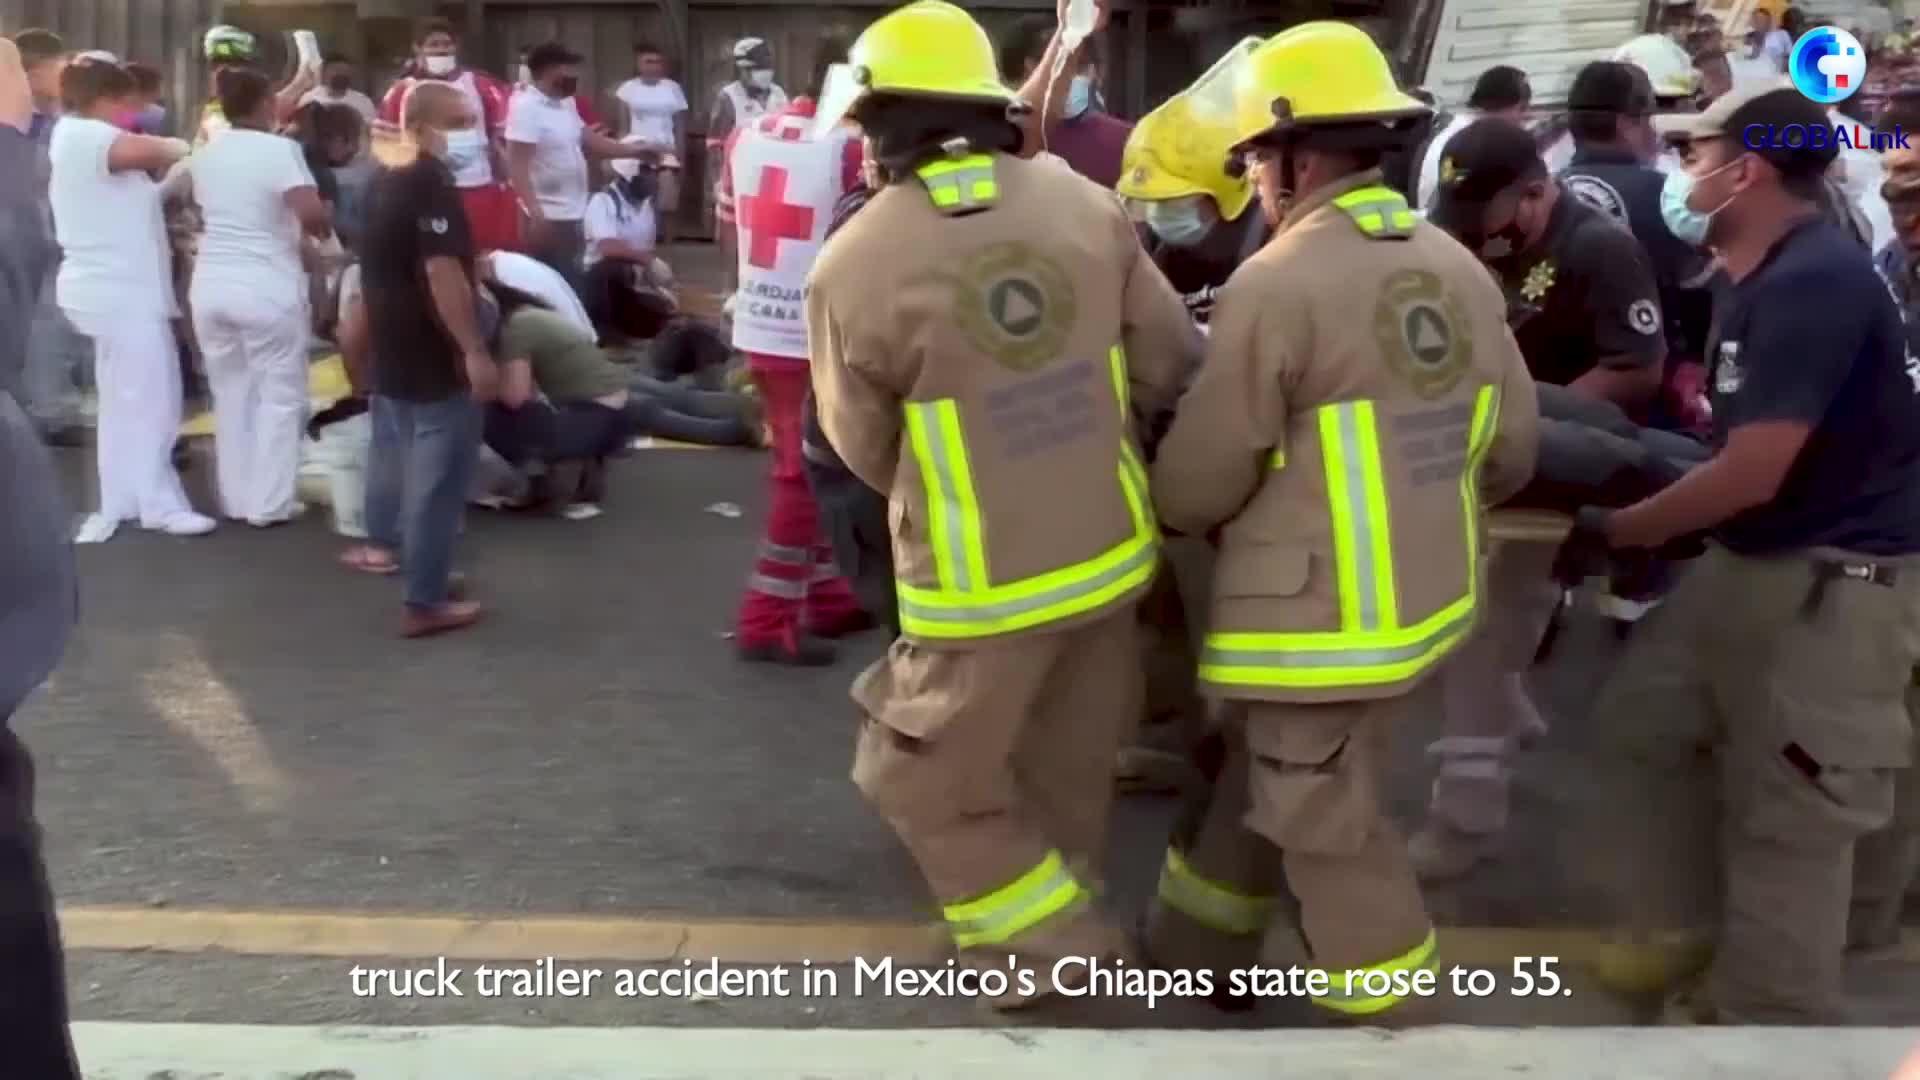 Mexico truck crash kills at least 55, action group founded to combat migrant smuggling